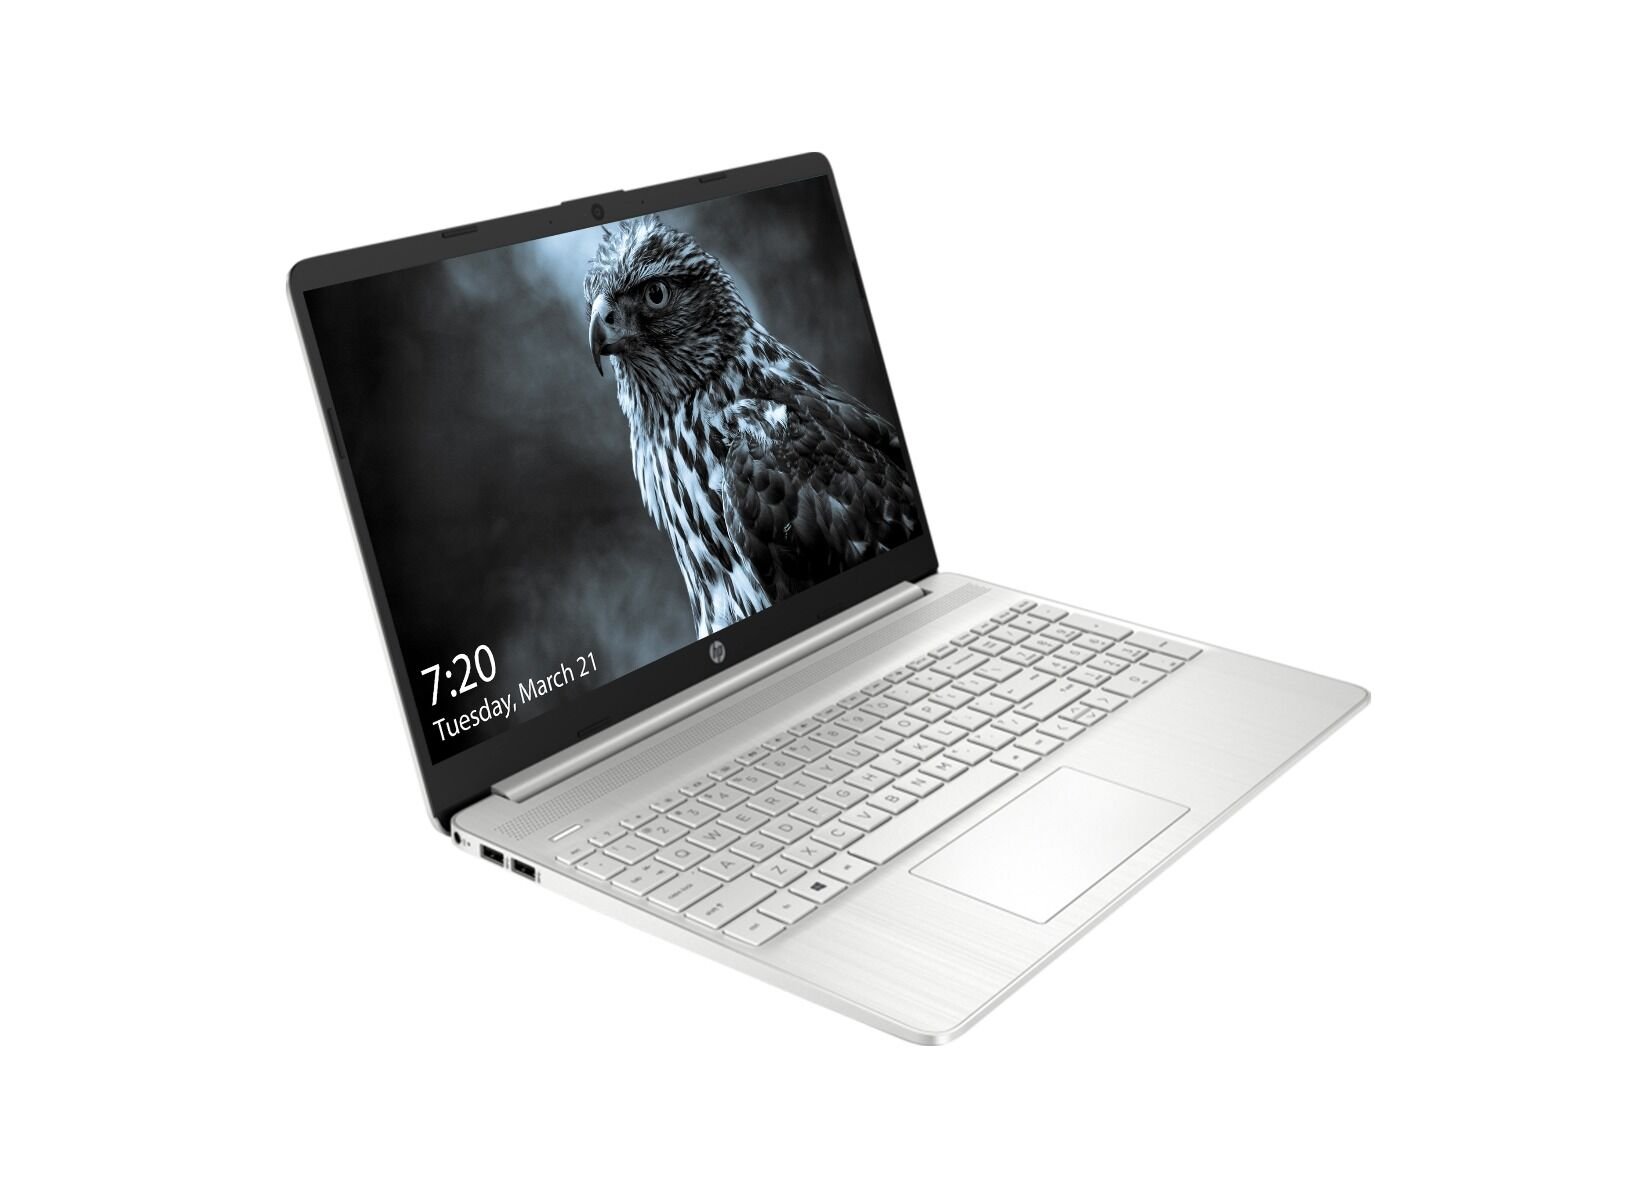 https://lappyvalley.com/storage/photos/1/Products3/hp-fq5295nia-12thgen-ci5-silver-laptop-rates-in-pakistan.jpg